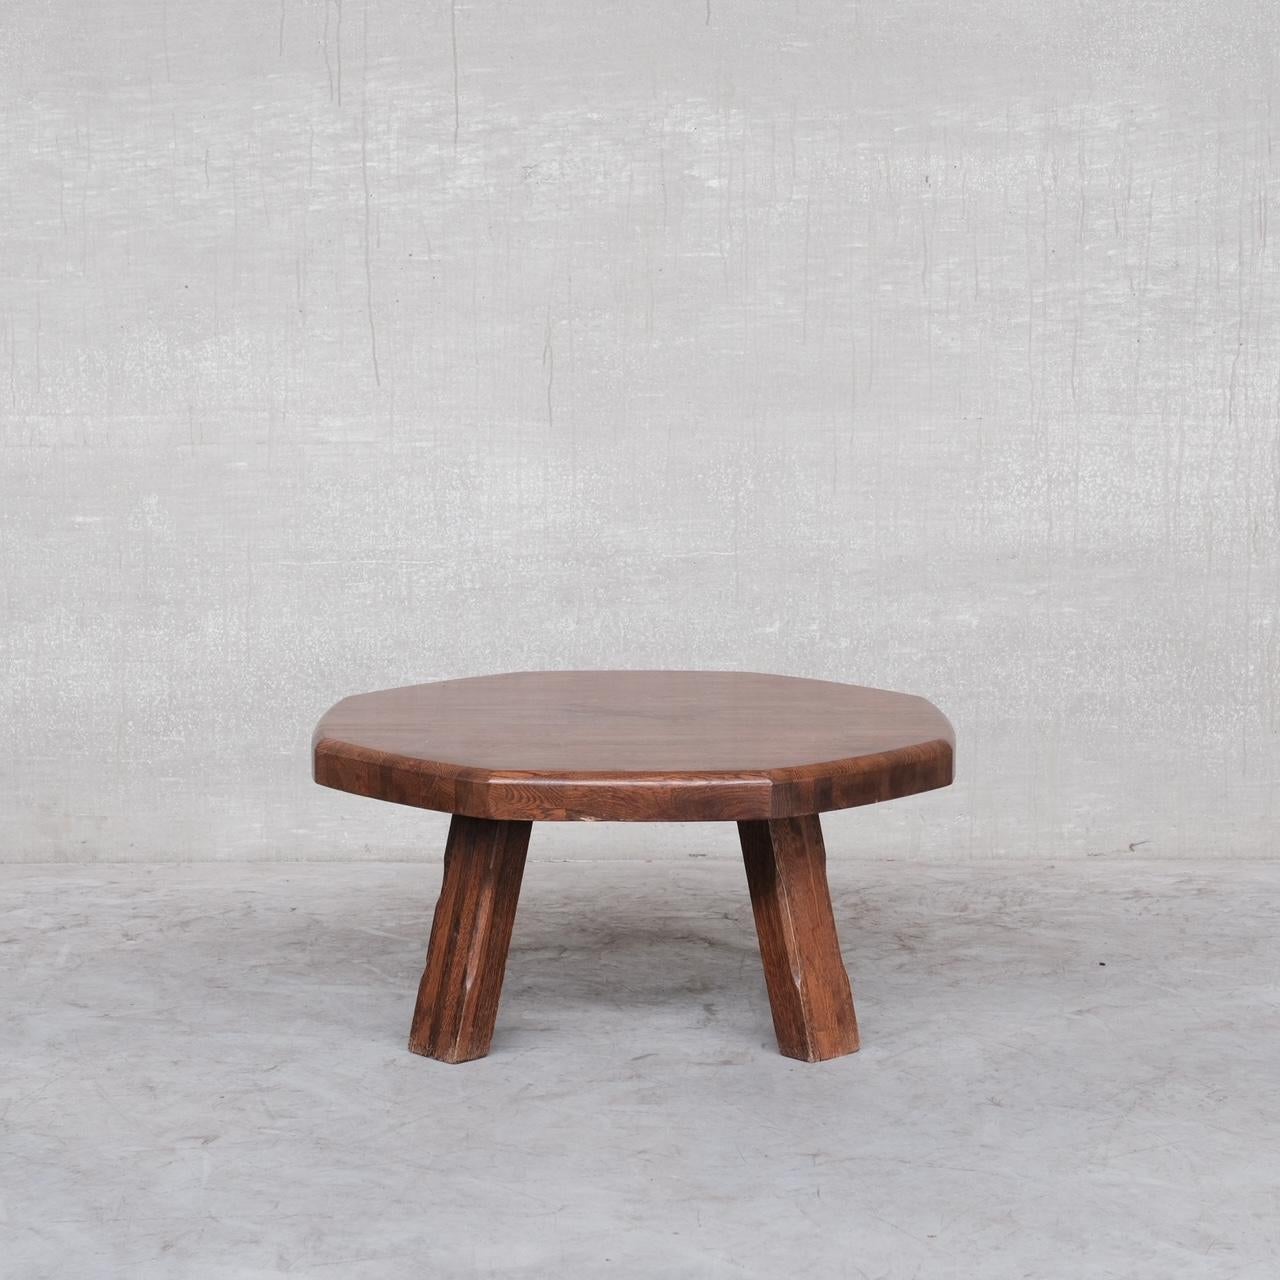 An octagonal chunky coffee table. 

Polished good quality wood. More elegant brutalist coffee table than our other options which are more rustic. 

Formed from slatted oak over four legs. 

France, c1970s.

Location: Belgium Gallery.